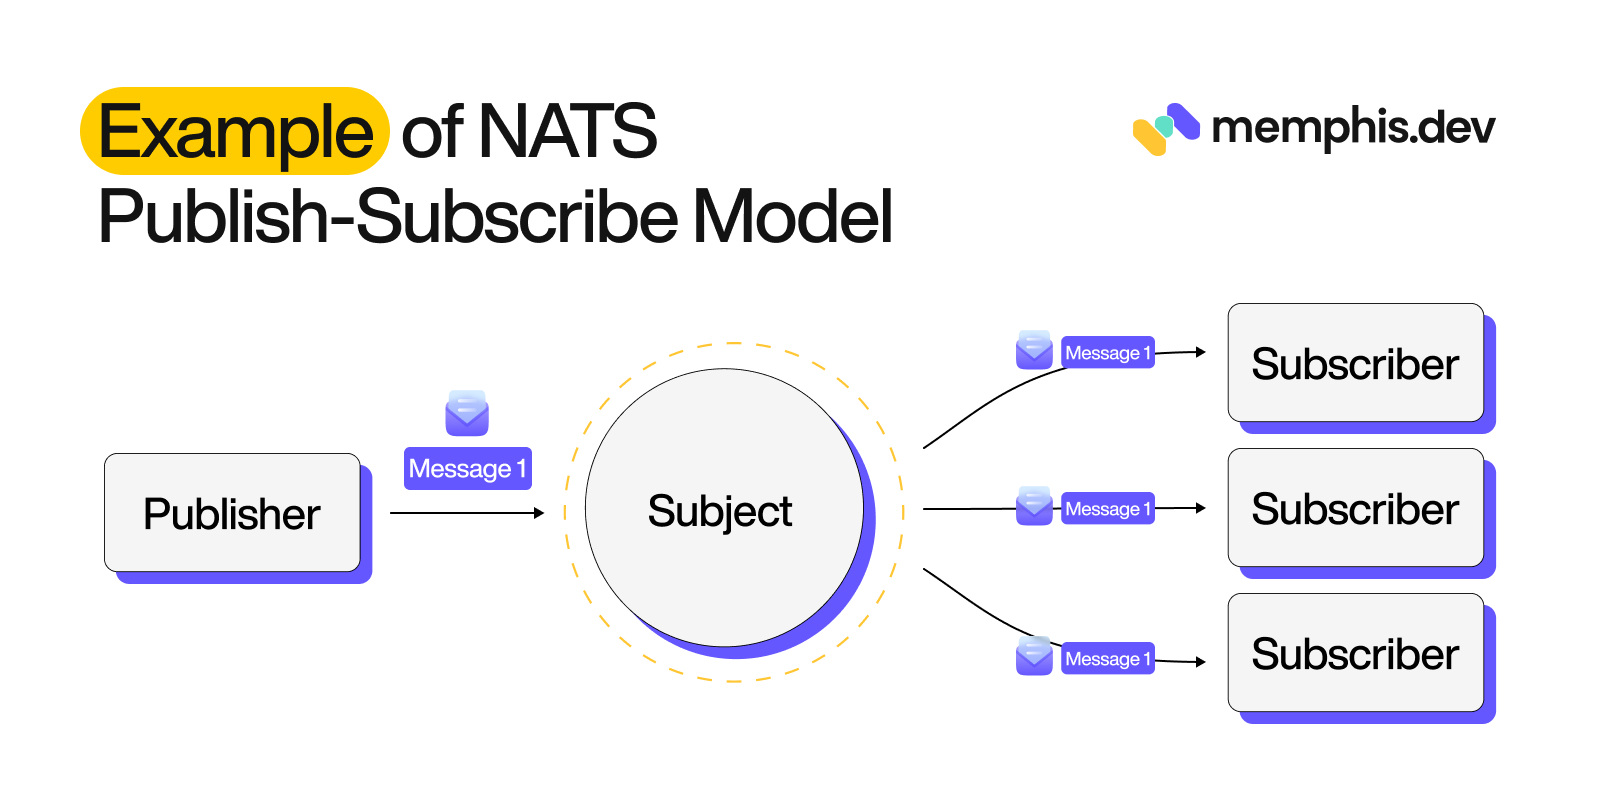 Example of NATS Publish-Subscribe Model